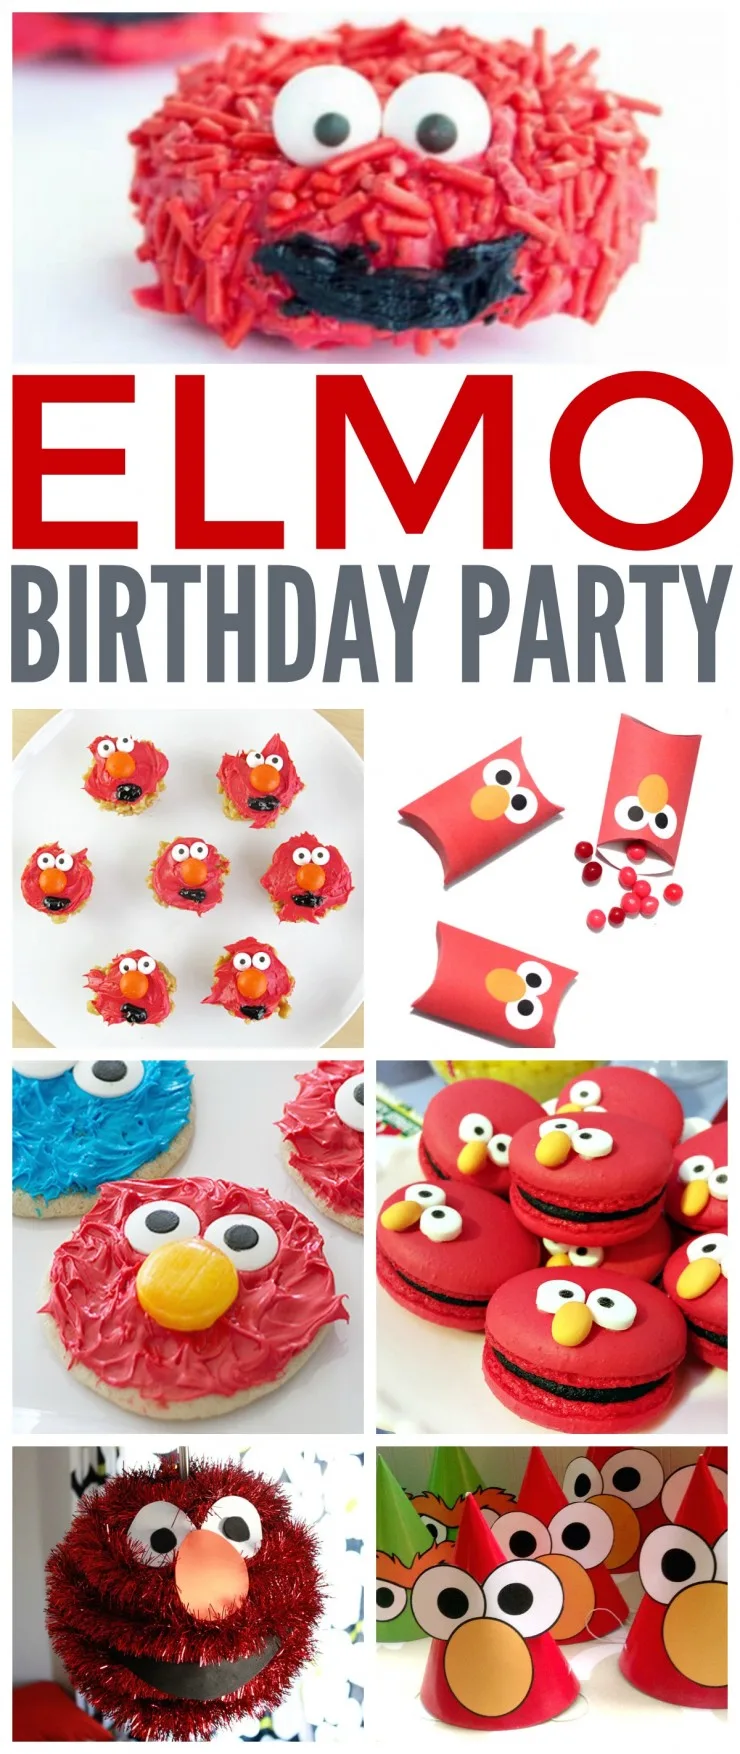 How to Throw the Ultimate Elmo Birthday Party to please any toddler on their birthday. Toddlers and preschoolers love Elmo, and so an Elmo themed birthday party is a natural choice. Check out these 25 ideas that will help you throw an amazing Elmo themed party for little fans of Sesame Street!